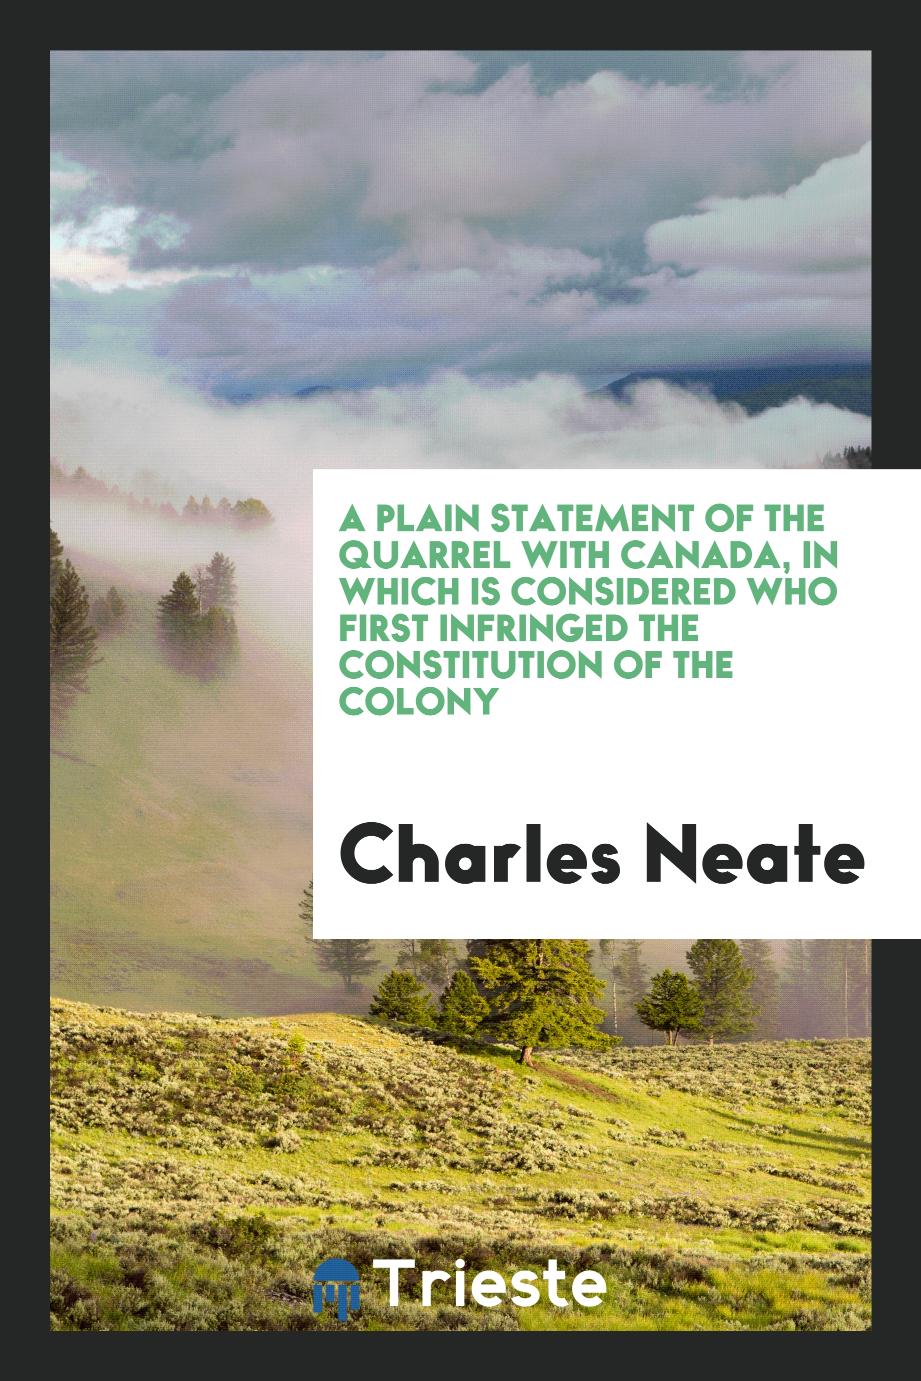 A plain statement of the quarrel with Canada, in which is considered who first infringed the constitution of the colony